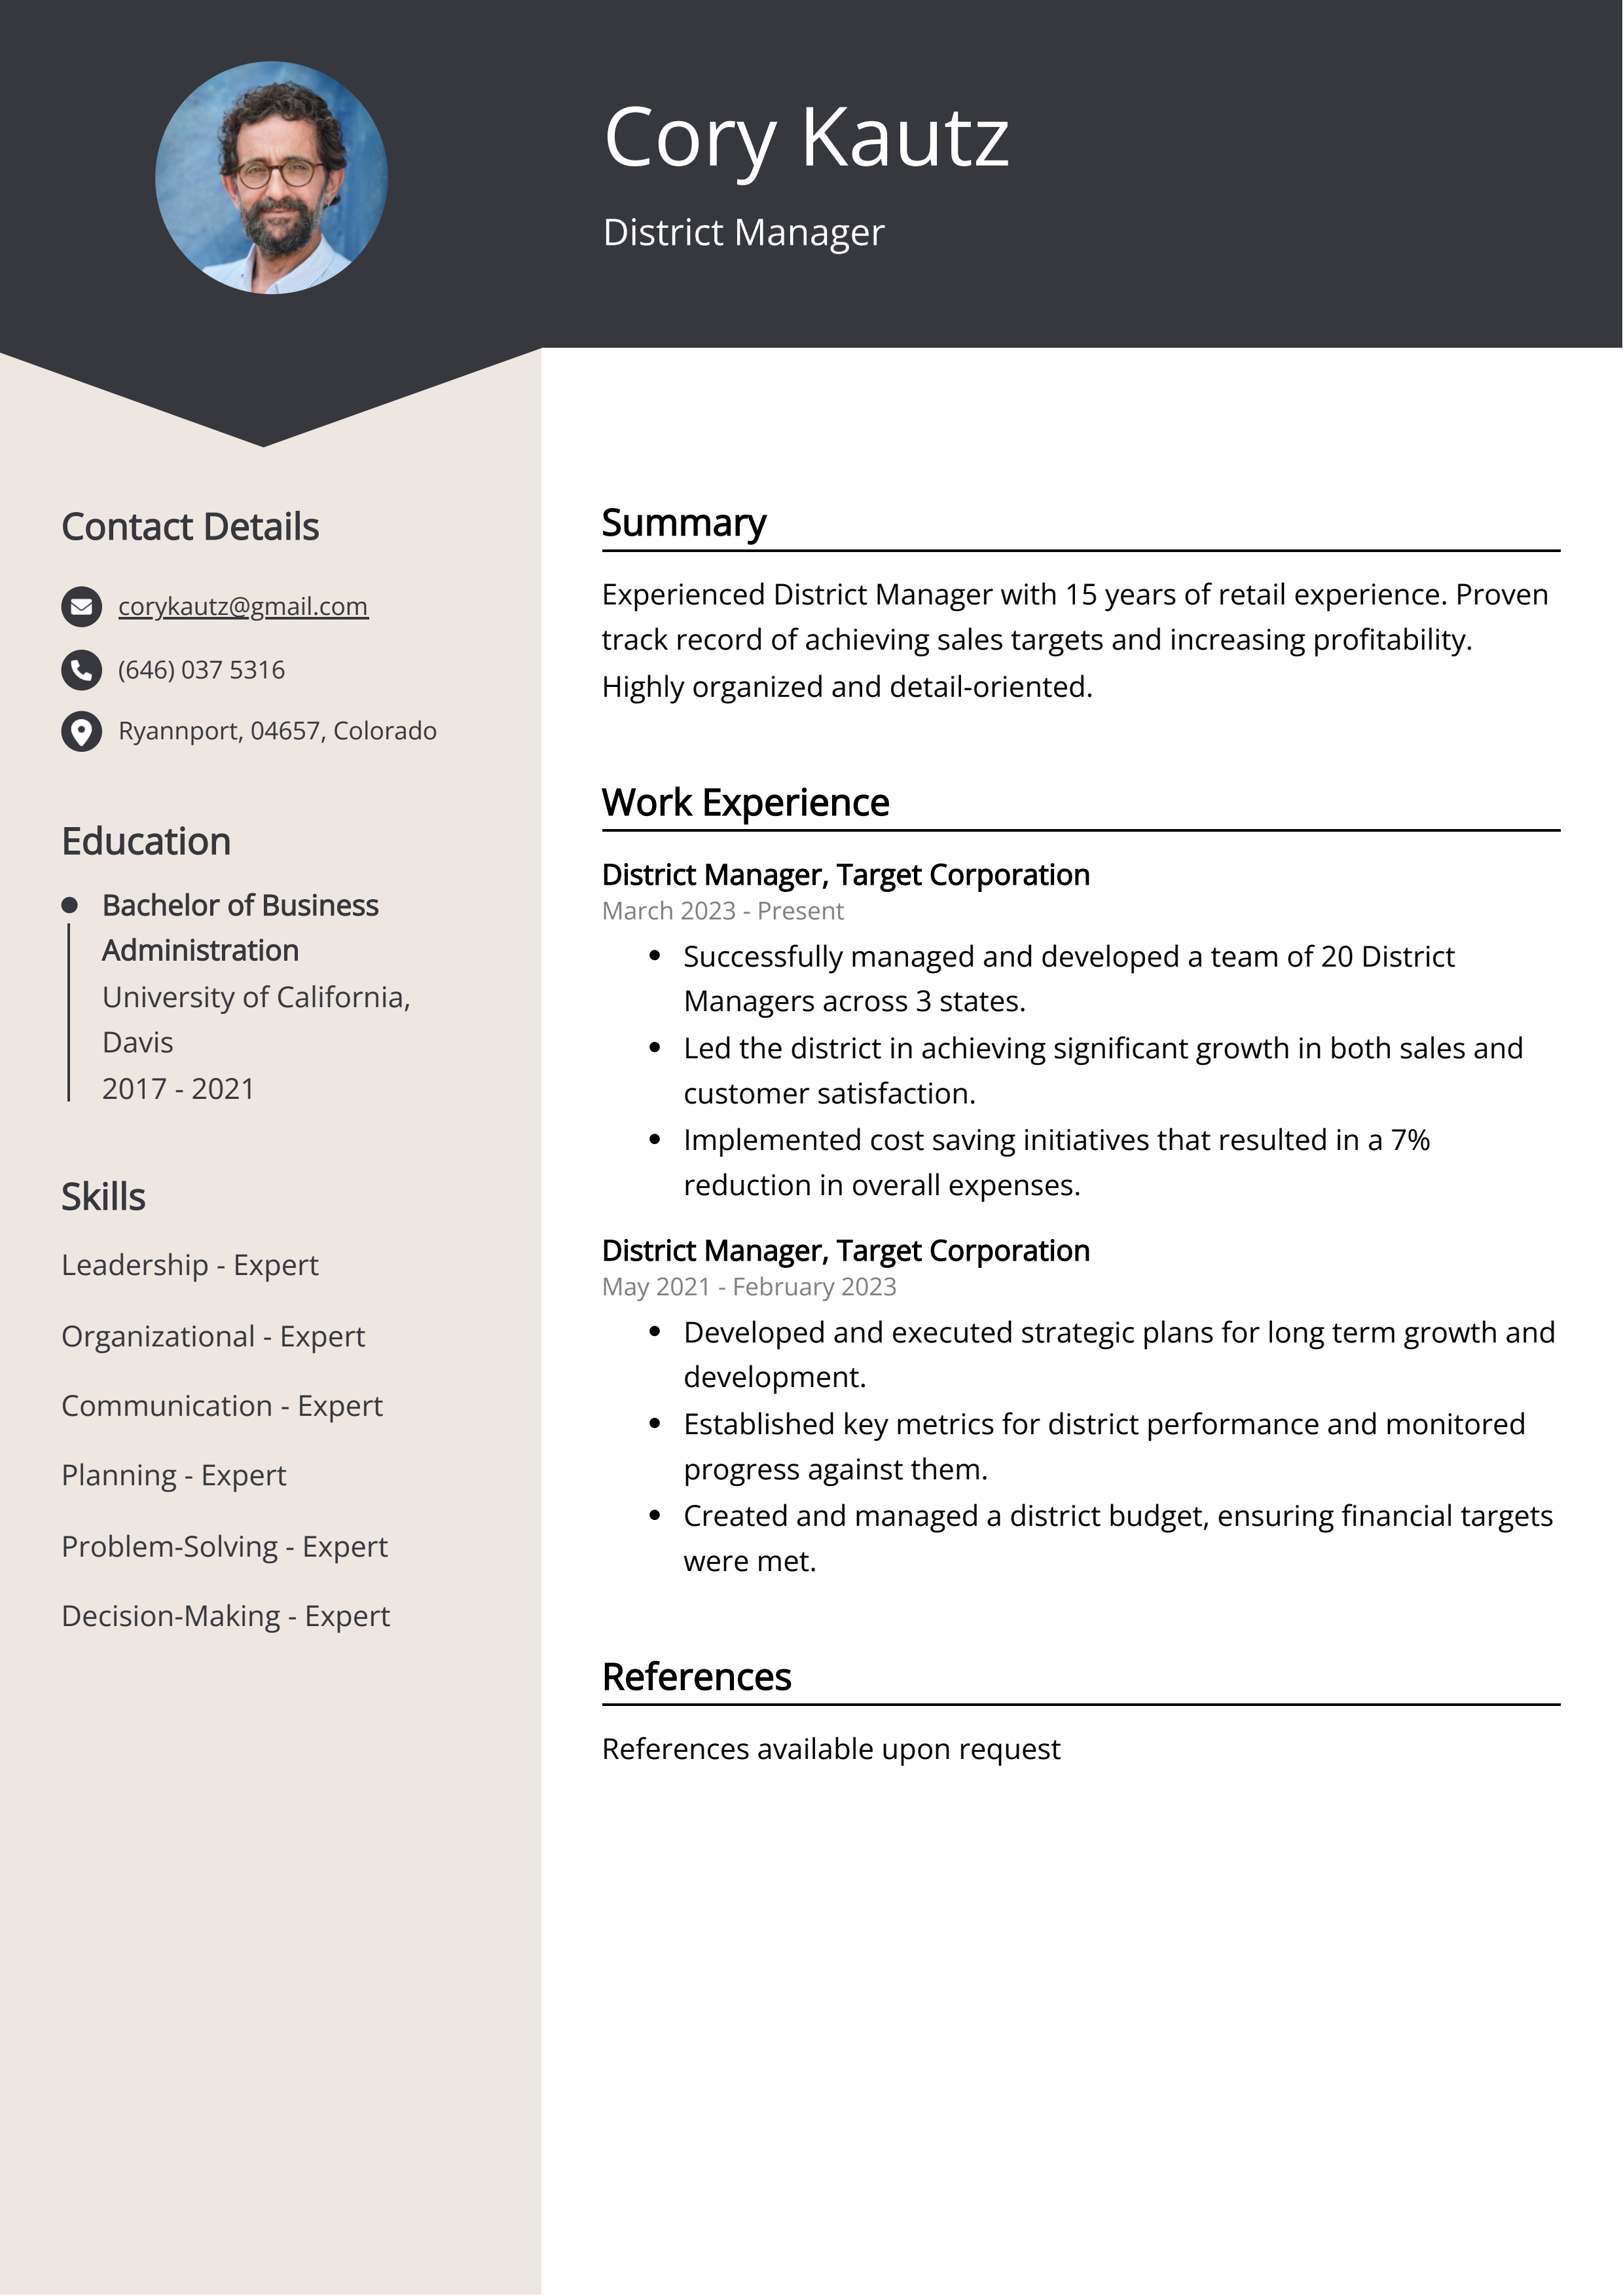 District Manager CV Example